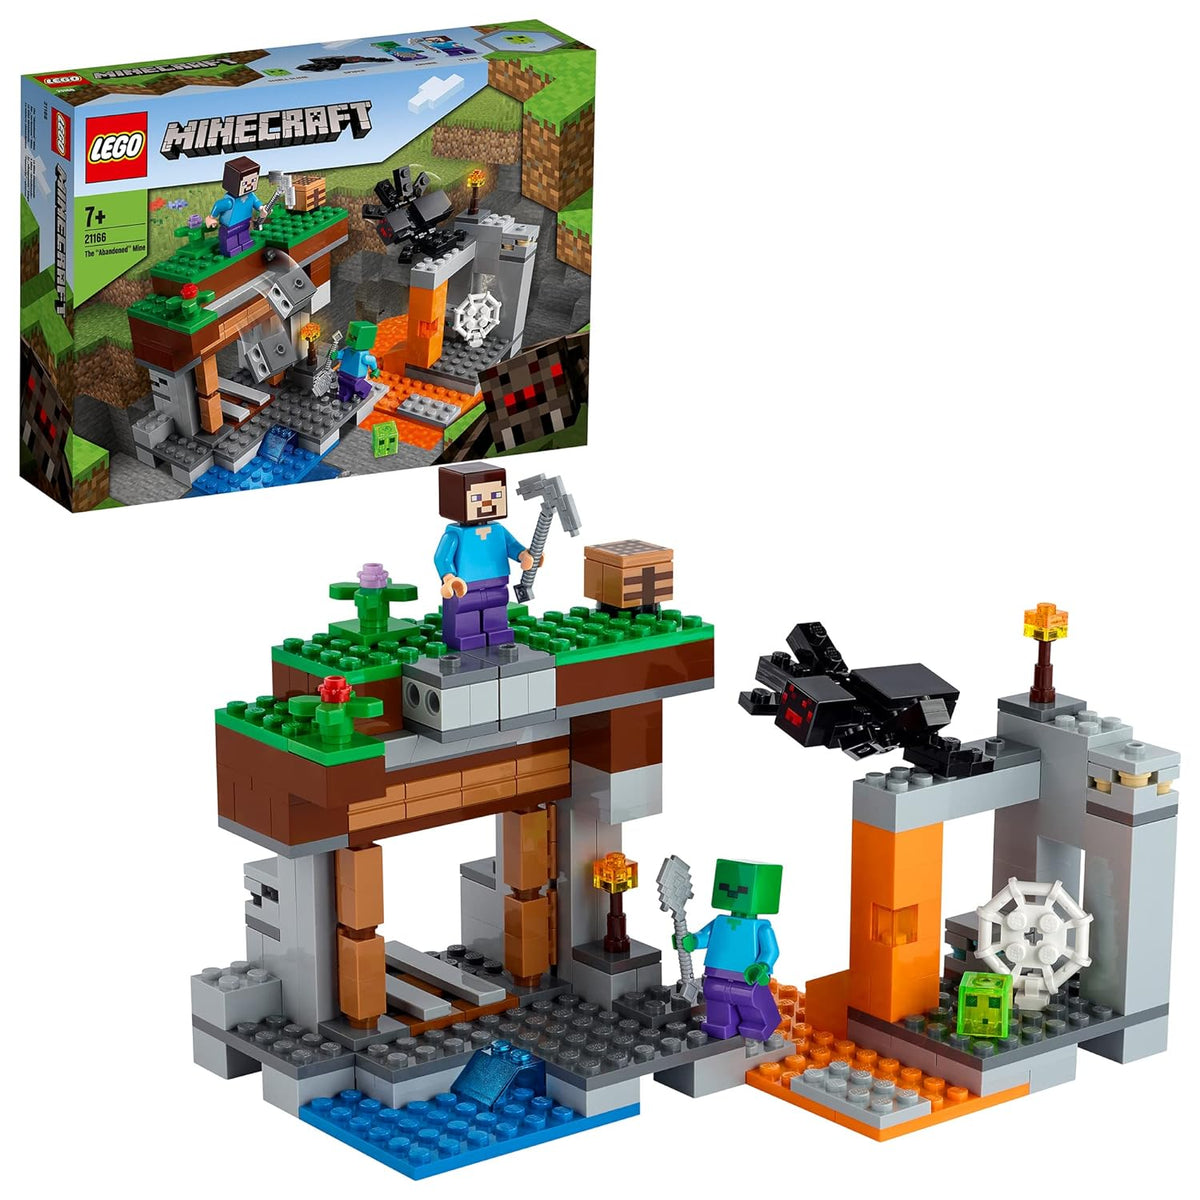 LEGO Minecraft The Abandoned Mine Set Building Kit for Ages 7+